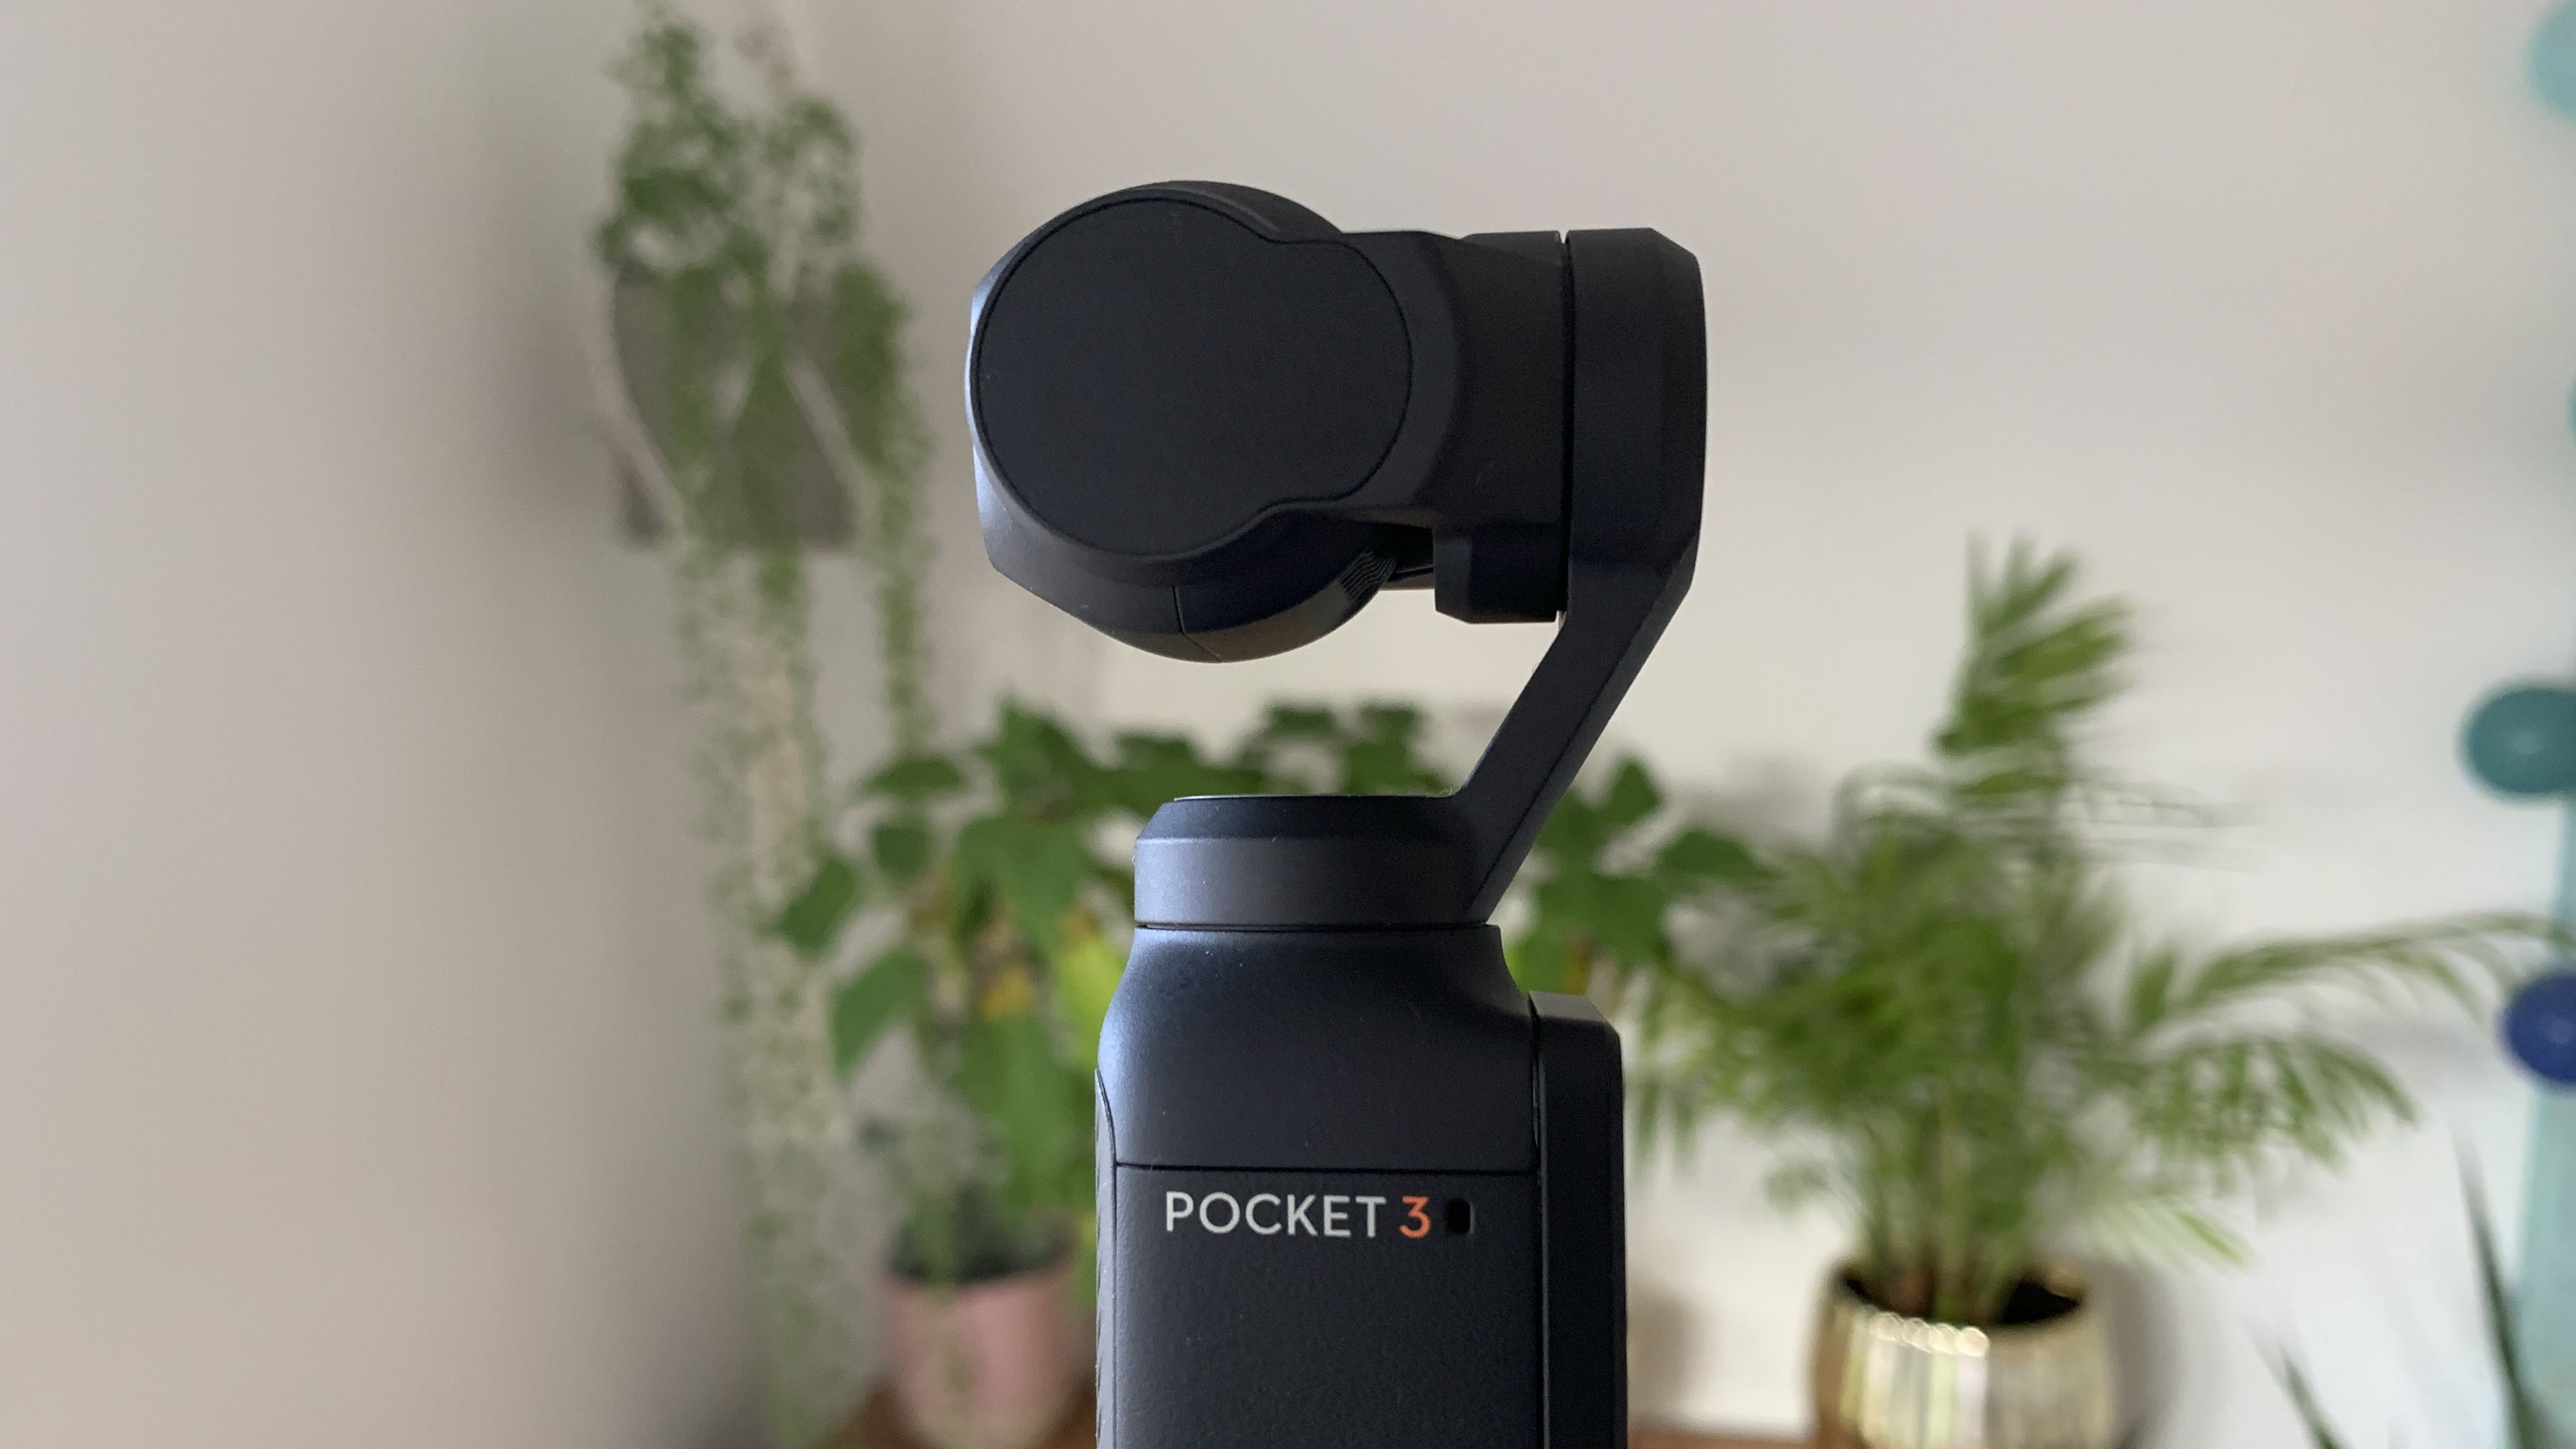 DJI Osmo Pocket 3 review: Maybe the only vlogging camera you need 